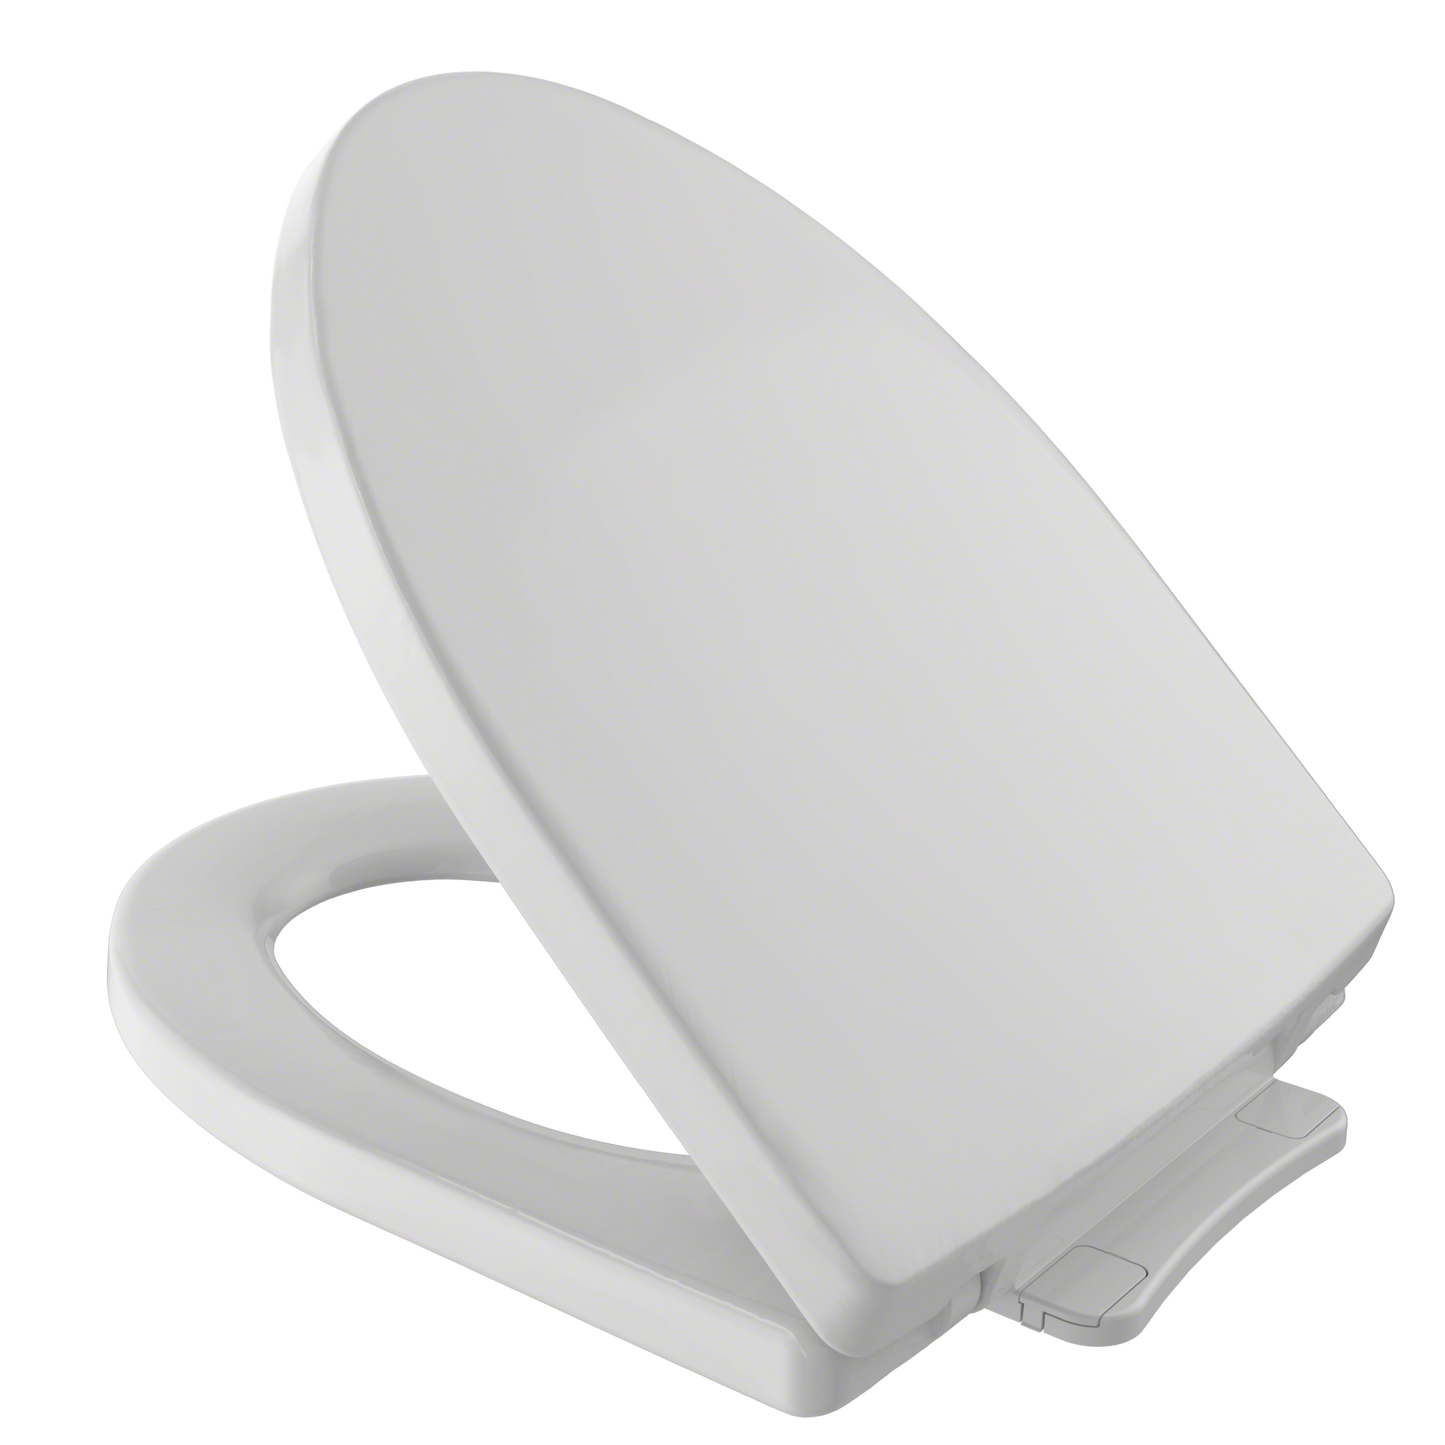 SS214#11 - Soiree SoftClose Elongated Toilet Seat- Colonial White